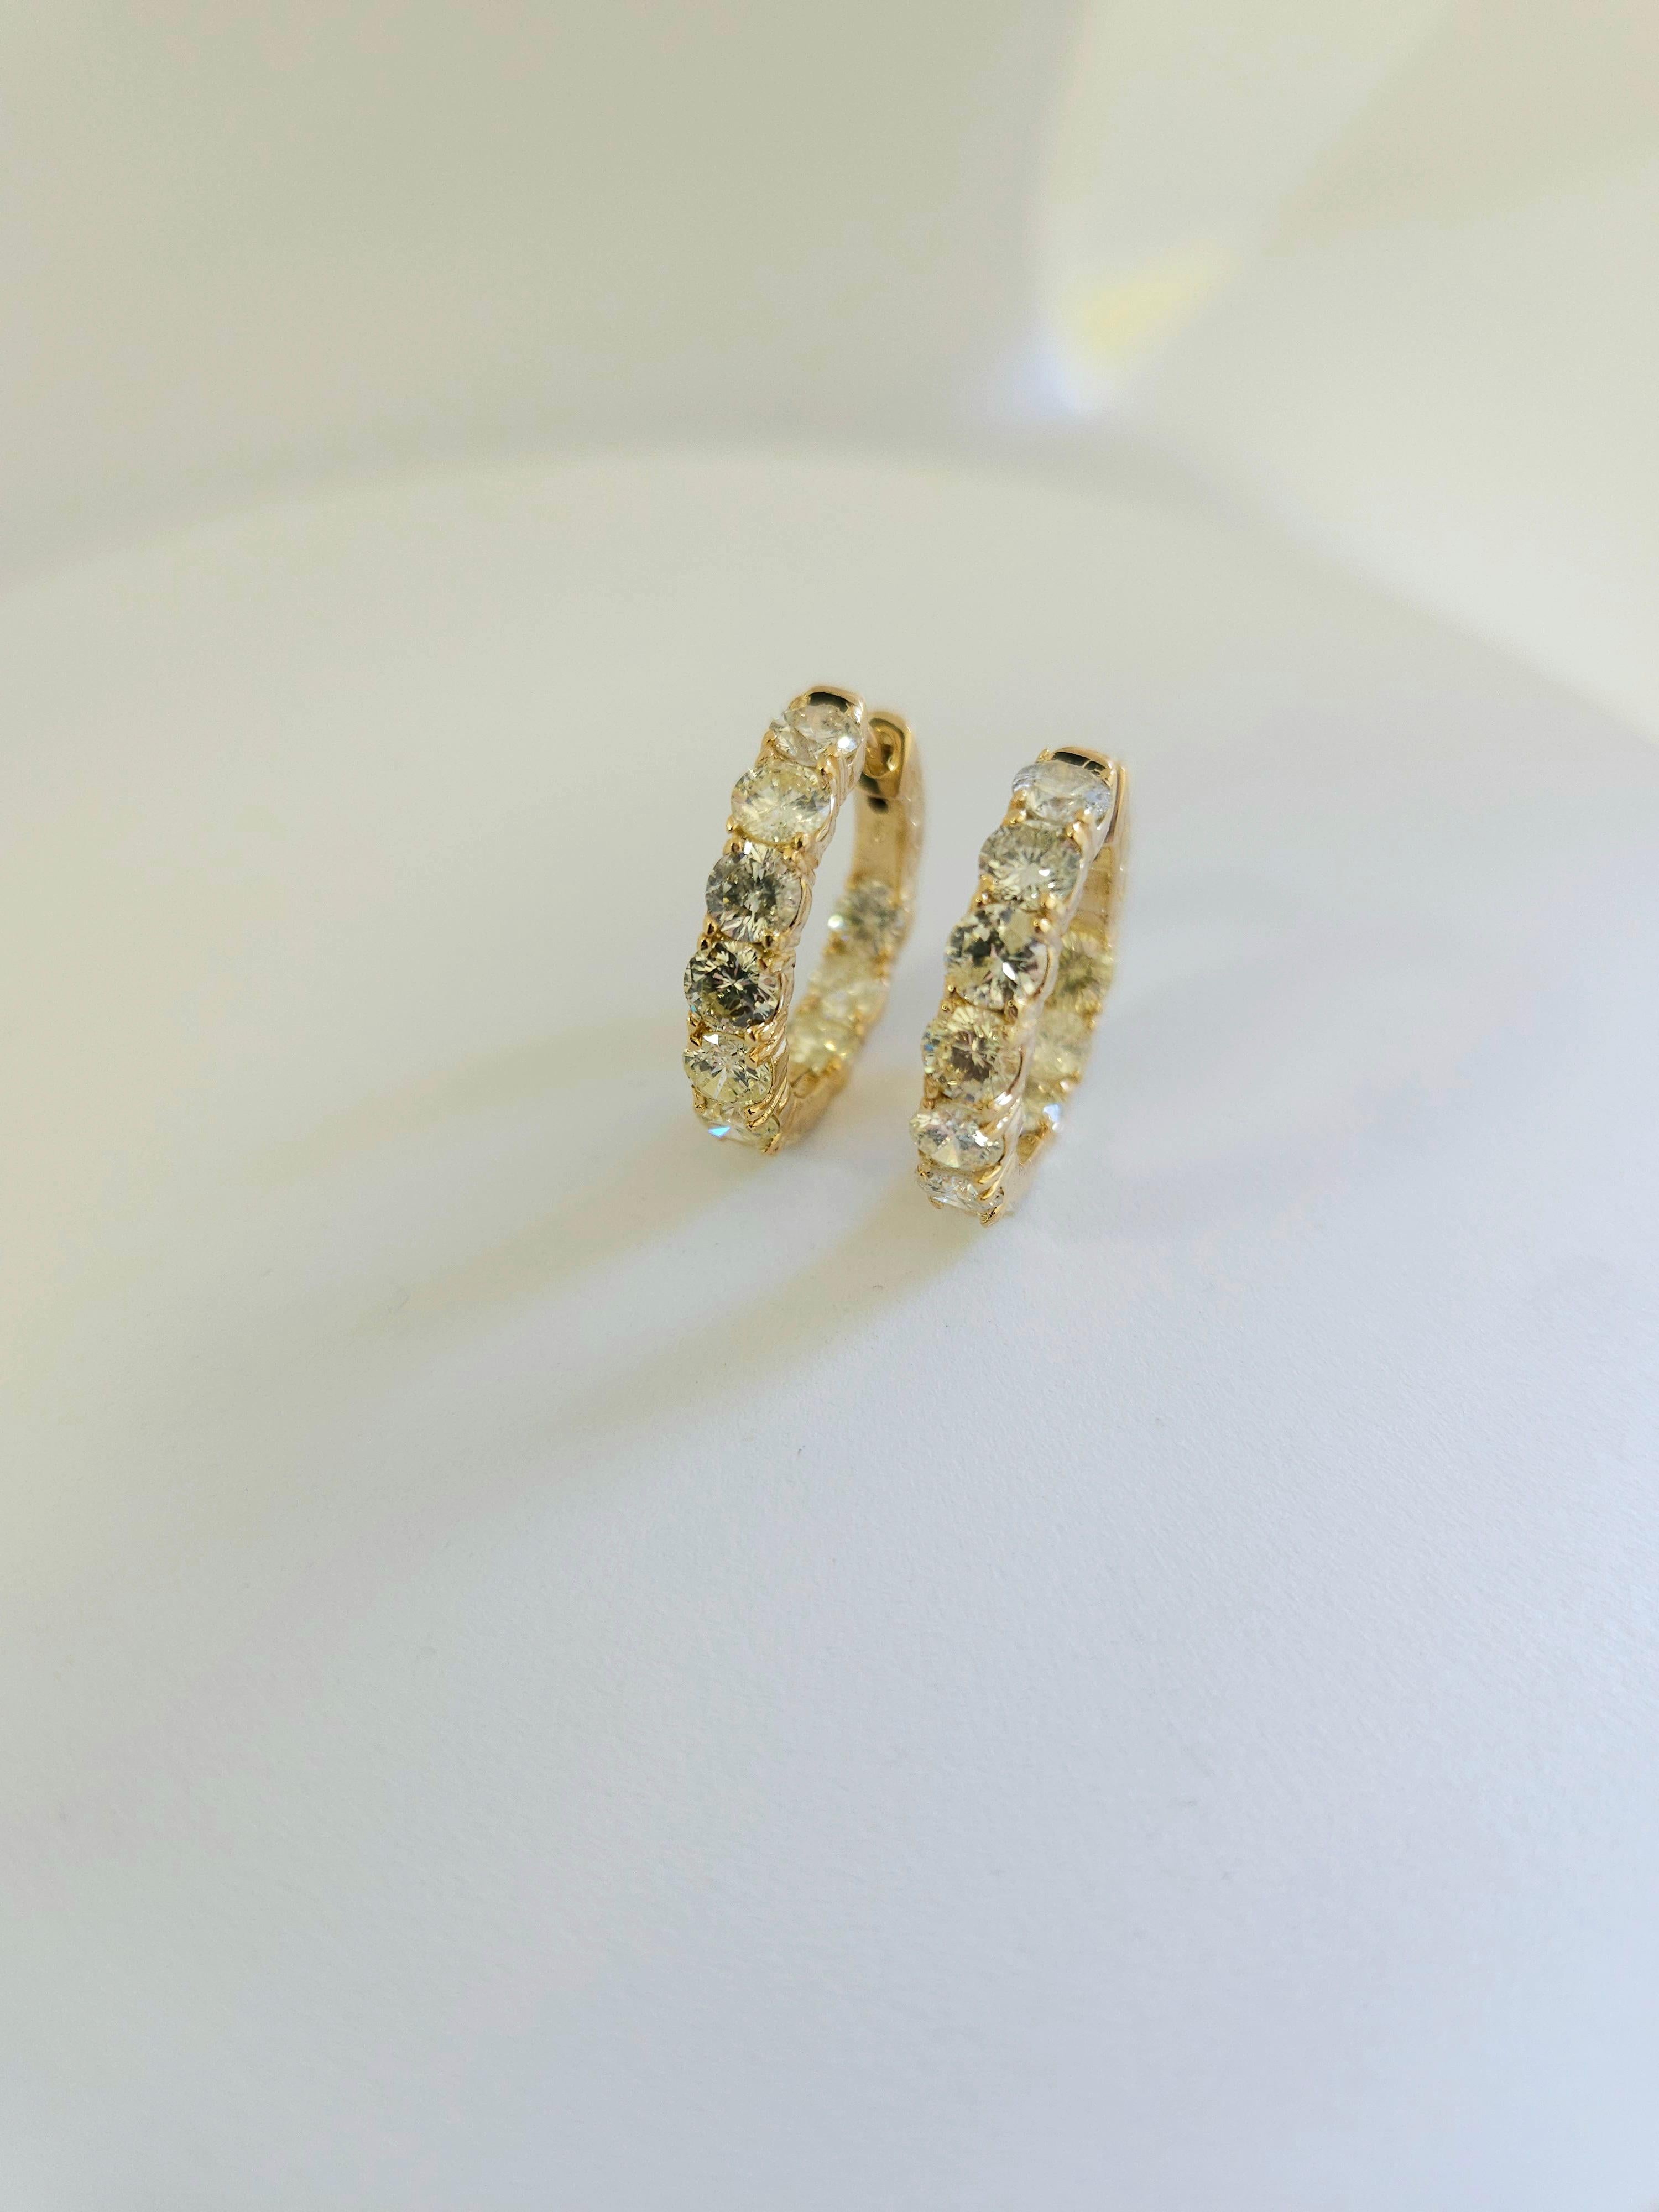 Beautiful pair of diamond Huggie hoop earrings in 14k yellow gold. Secures with snap closure for wear. 
Elegance for every moment. Inside out style
Average Color I, Clarity SI,I 
Measures 0.75 inch diameter.  5.97 grams

*Free Shipping within U.S*